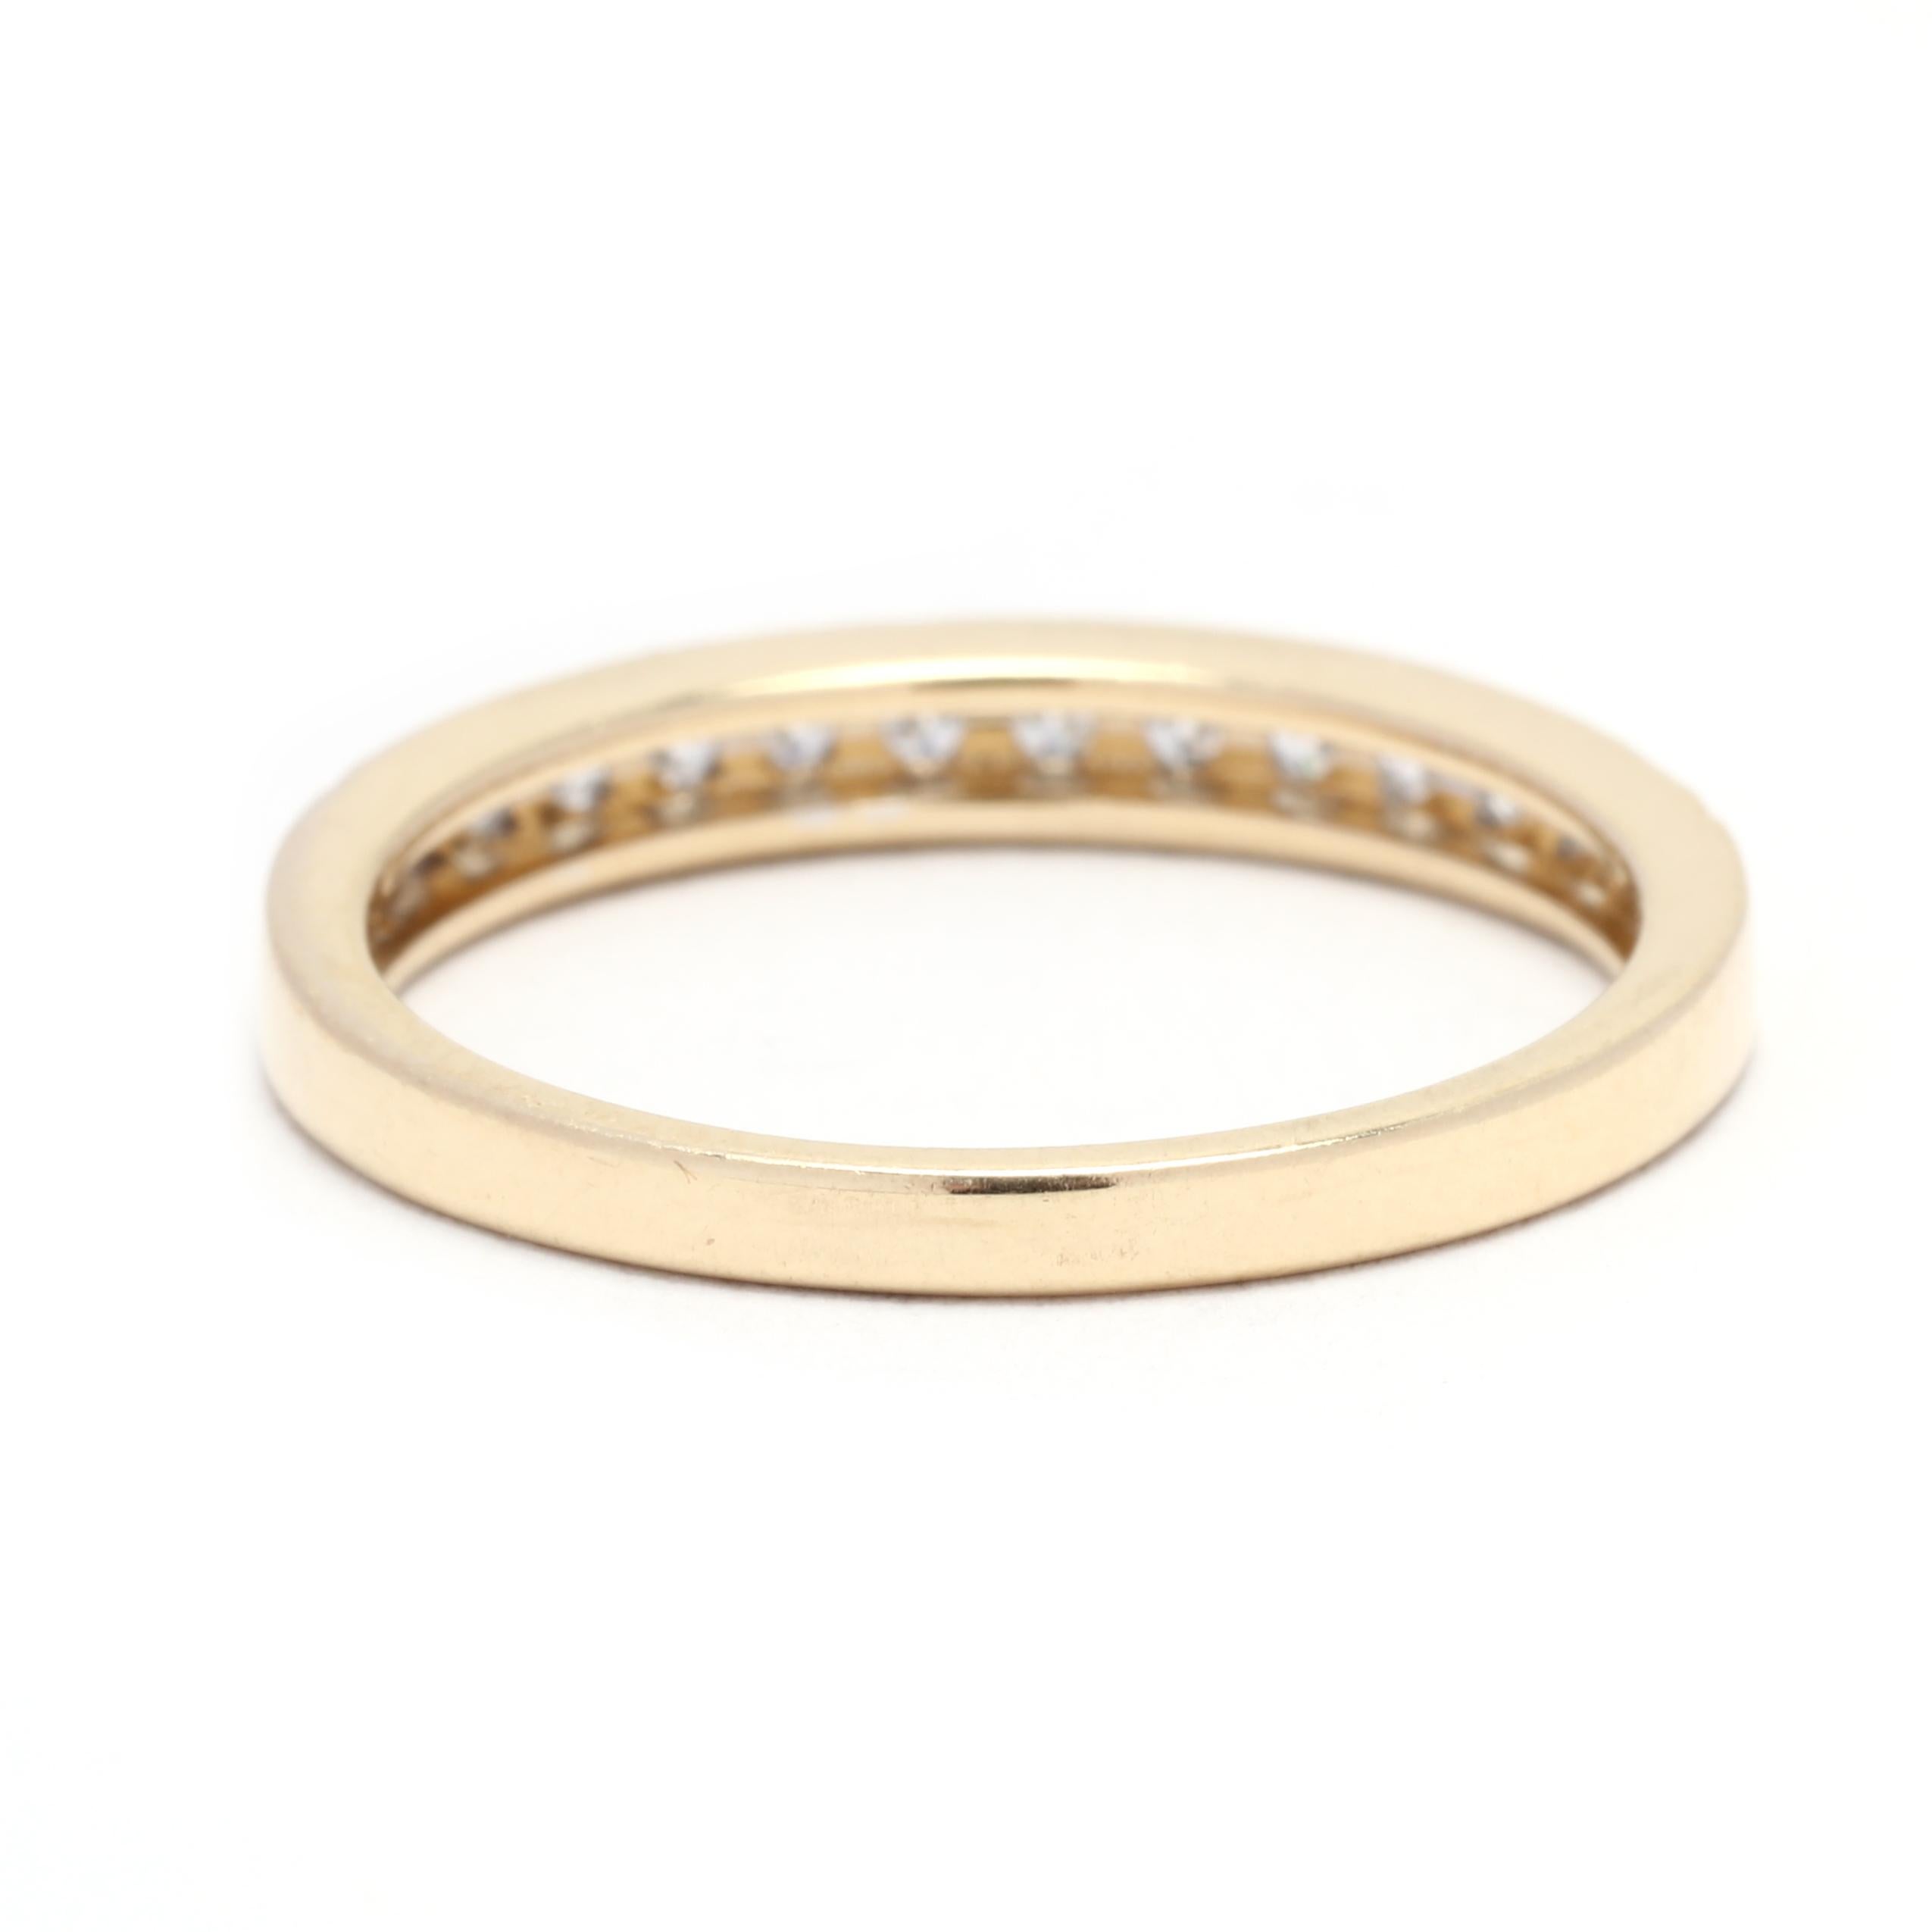 Brilliant Cut 0.23ctw Thin Diamond Wedding Band, 14K Yellow Gold, Ring Size 6.5, Stackable For Sale